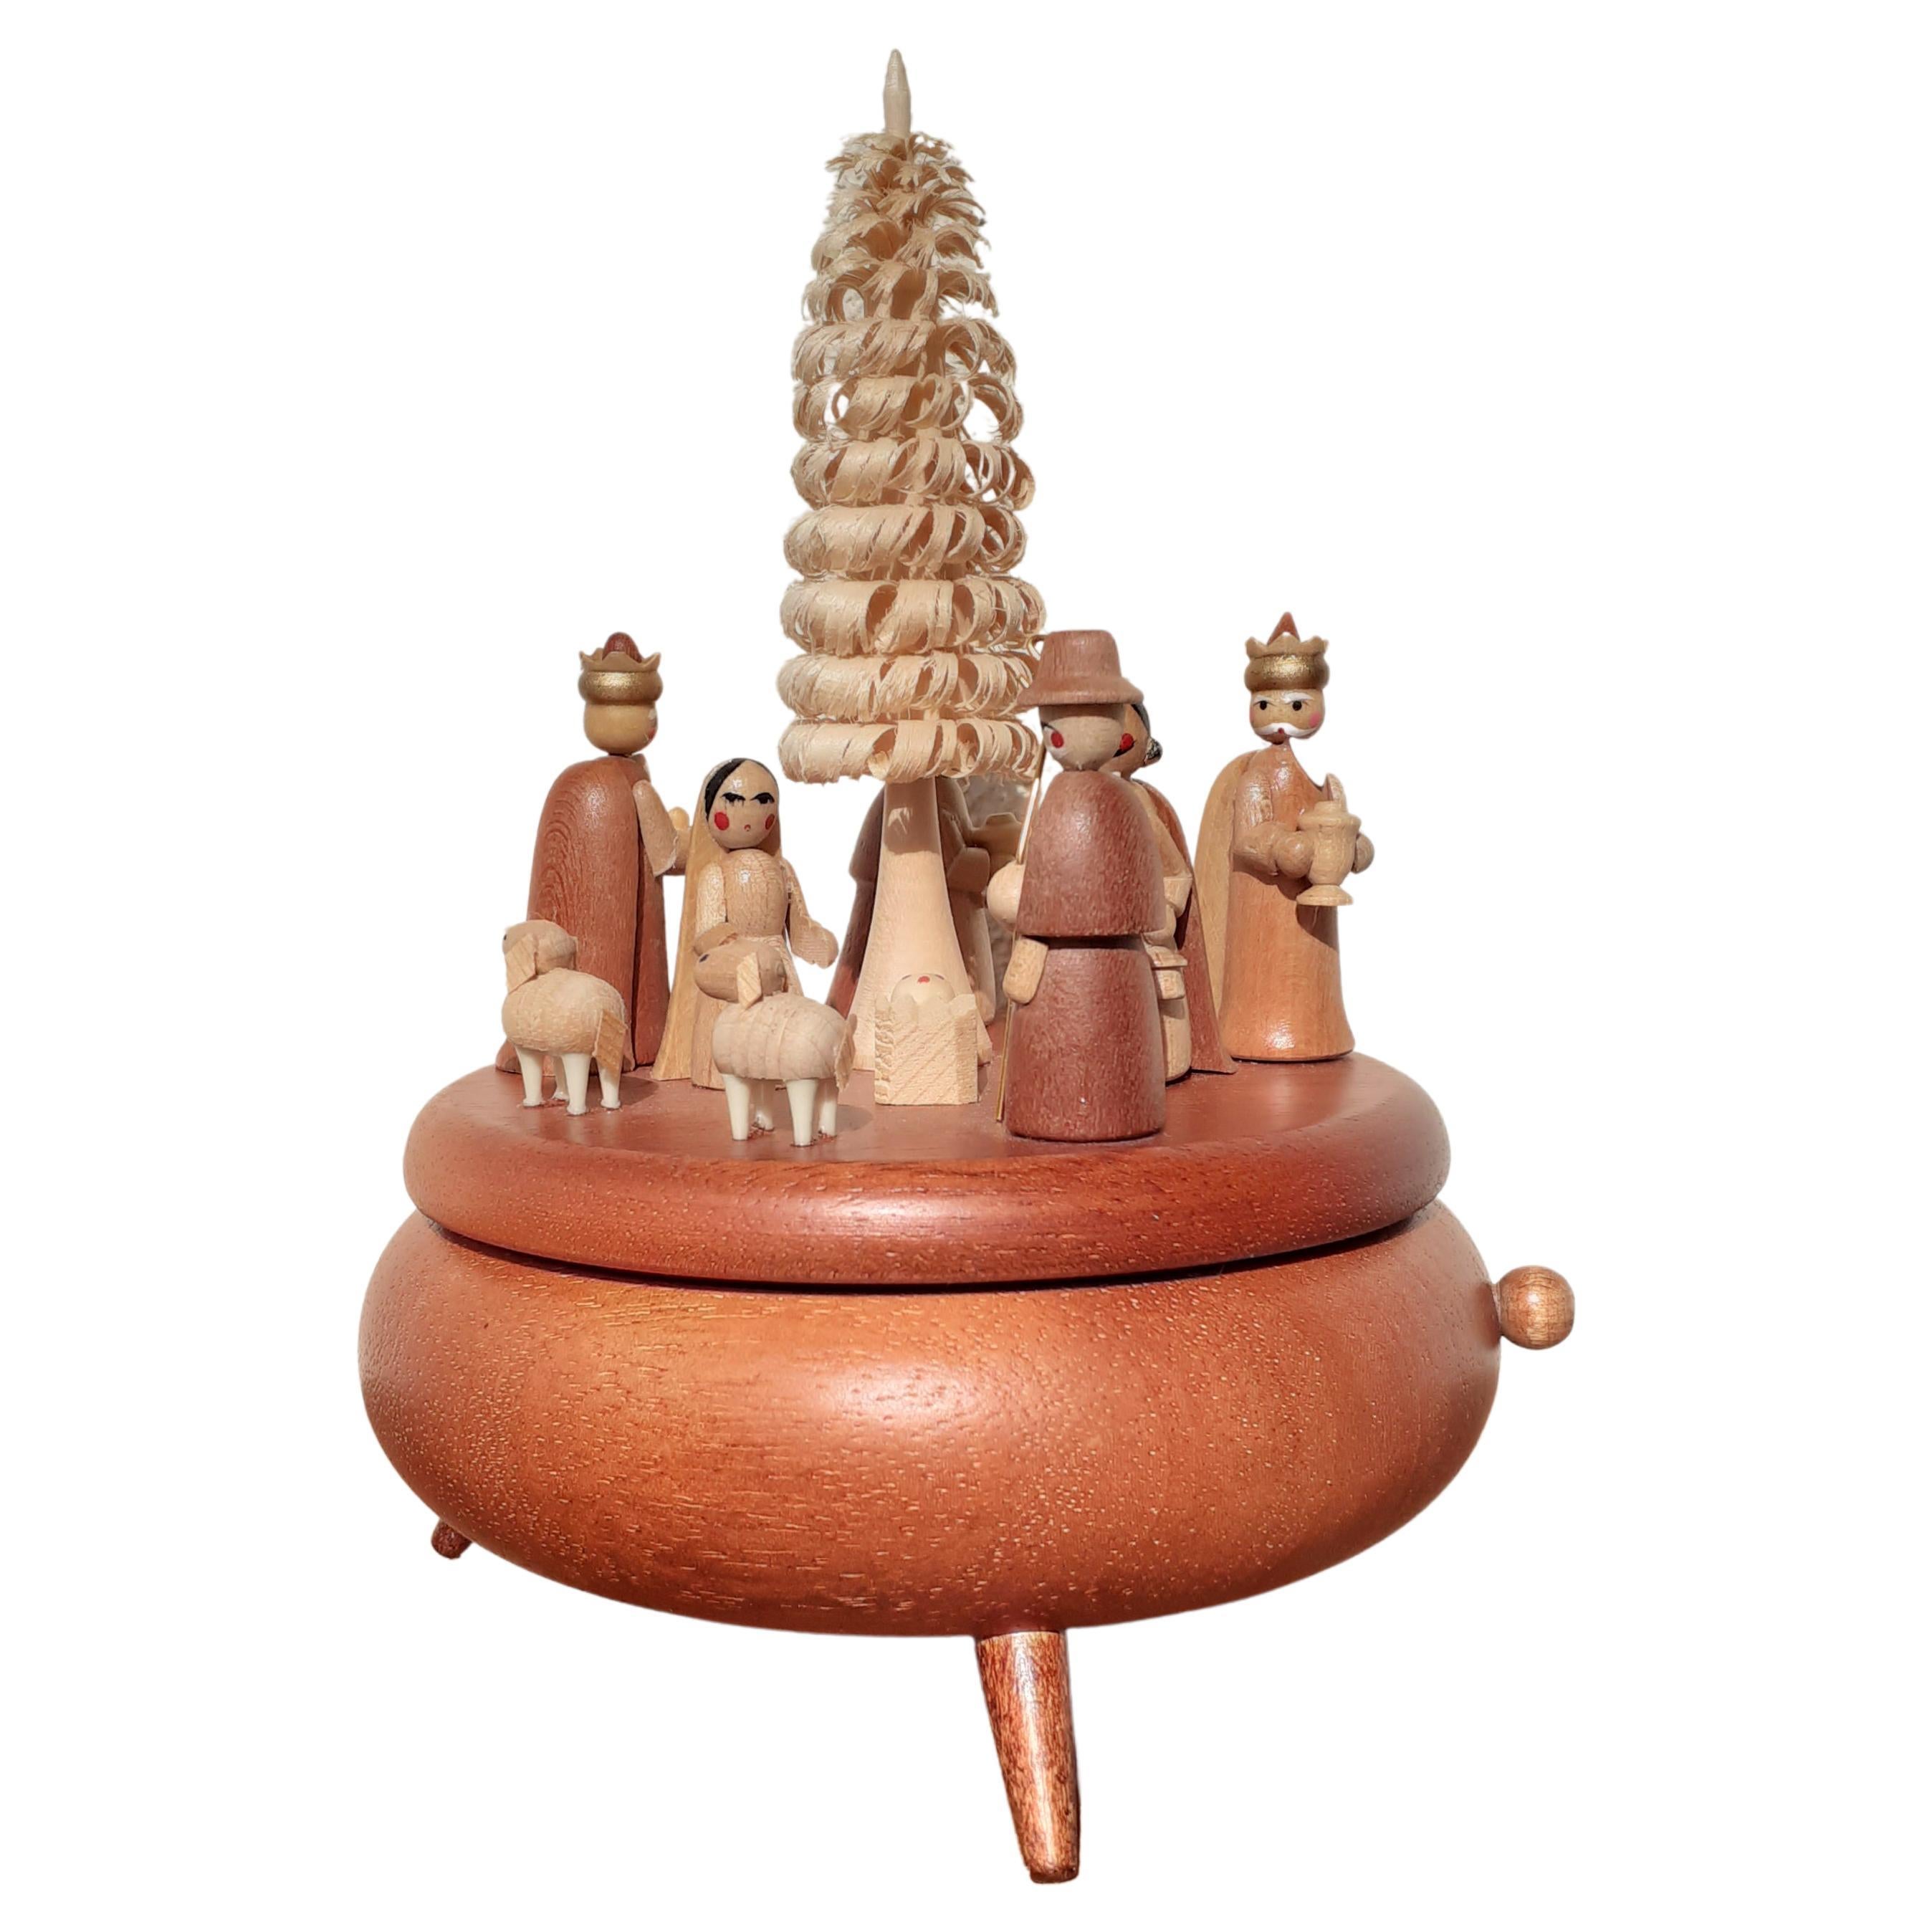 Exceptional Mobile Christmas Crib in Wood Reuge Sainte Croix Music Box